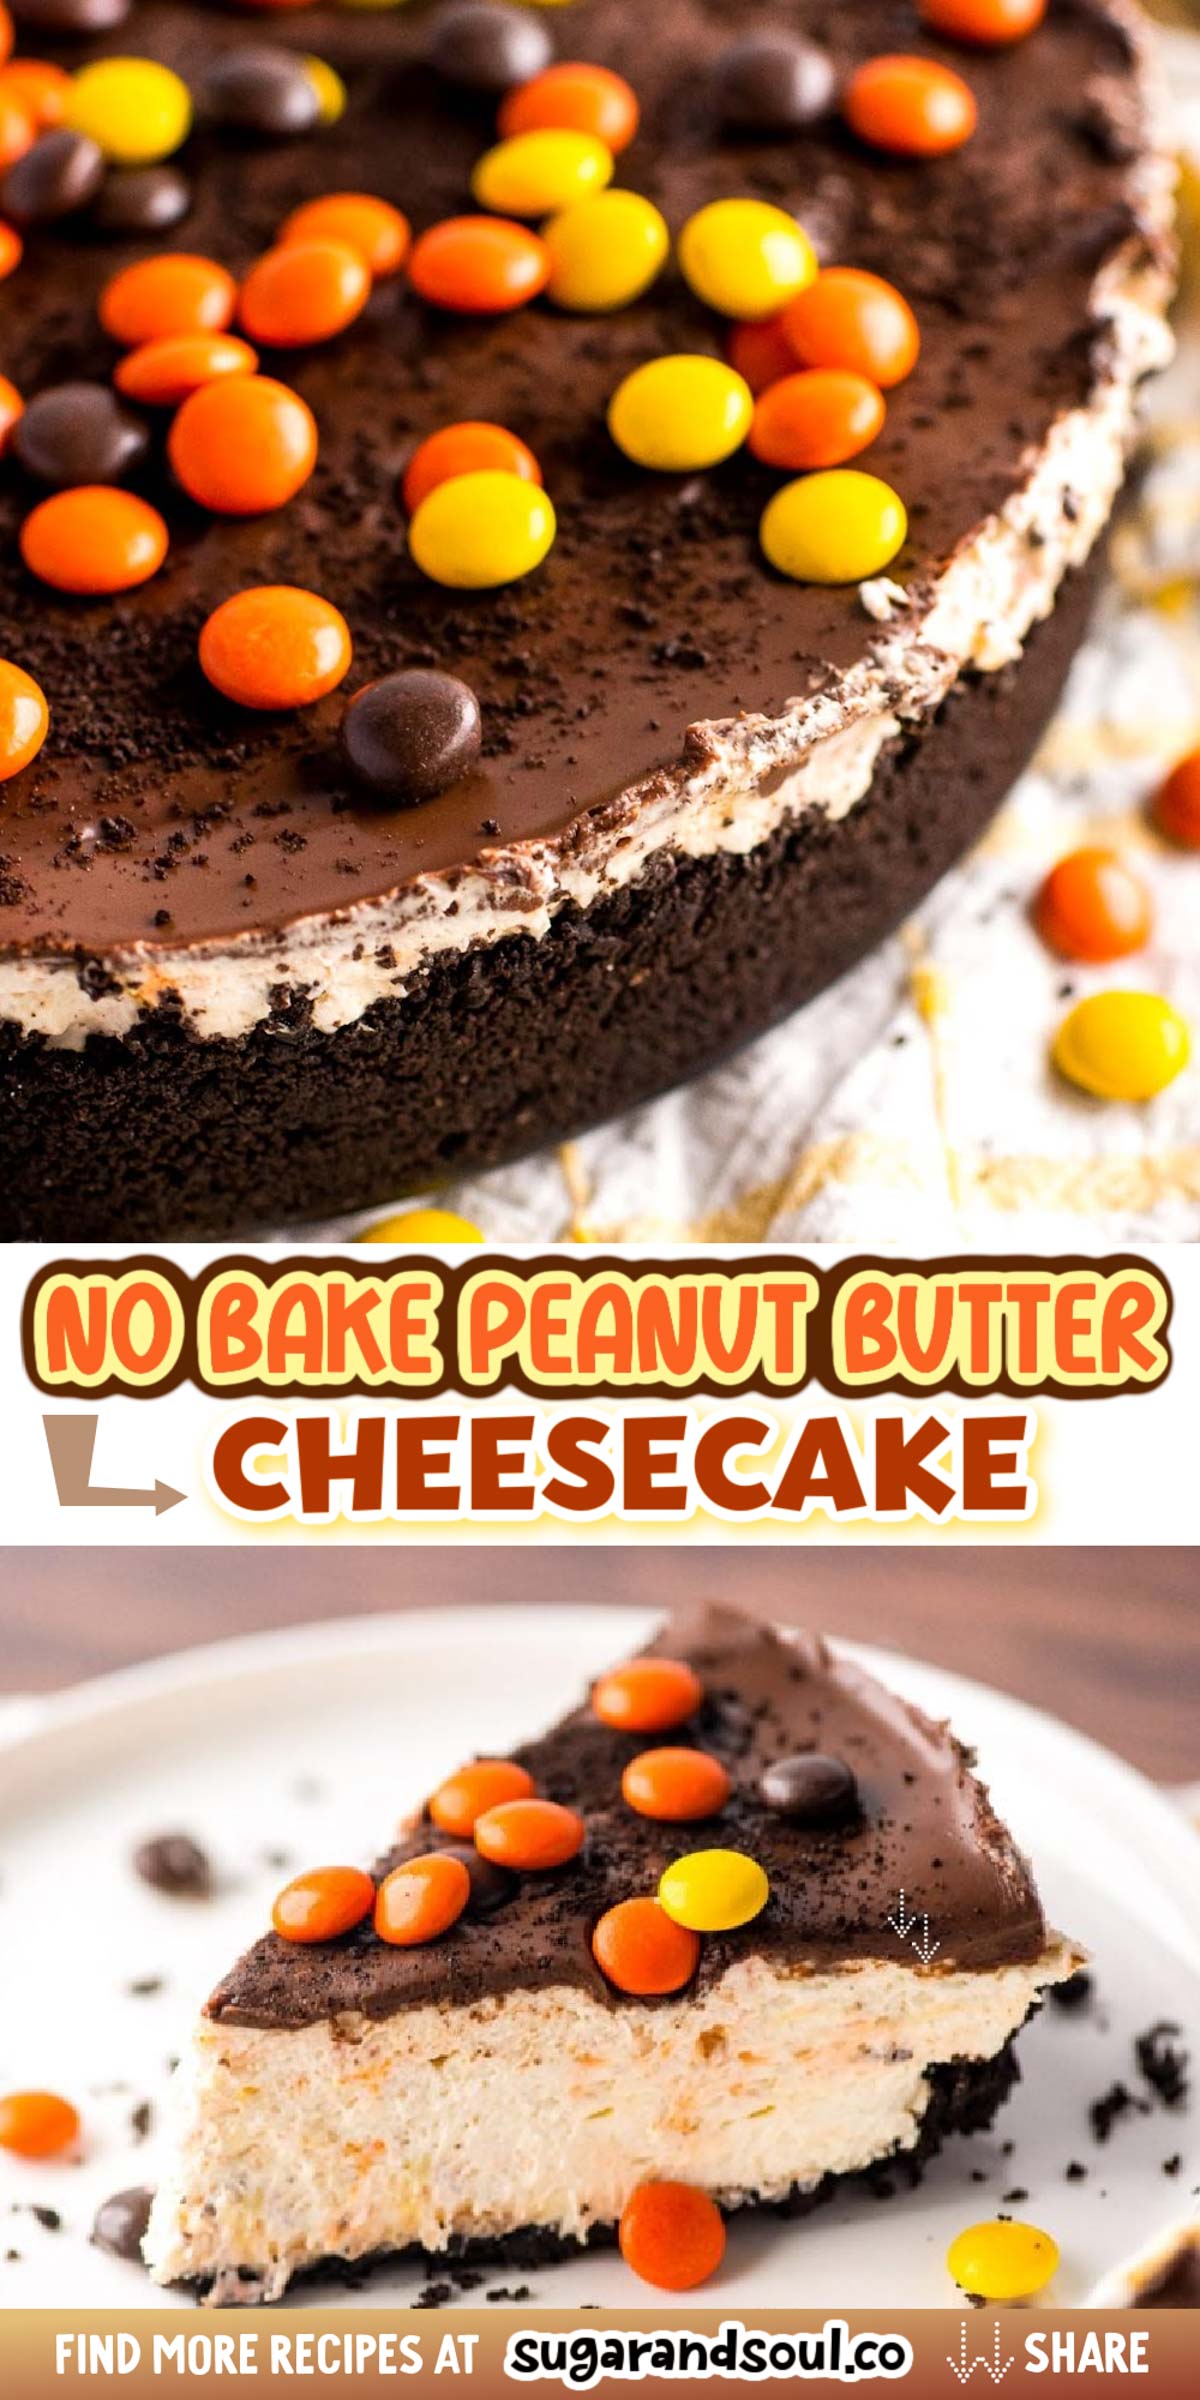 No-Bake Peanut Butter Cheesecake is loaded with perfect crunchy peanut buttery flavor using Reese's Pieces with an Oreo crust for an easy dessert you'll love! via @sugarandsoulco